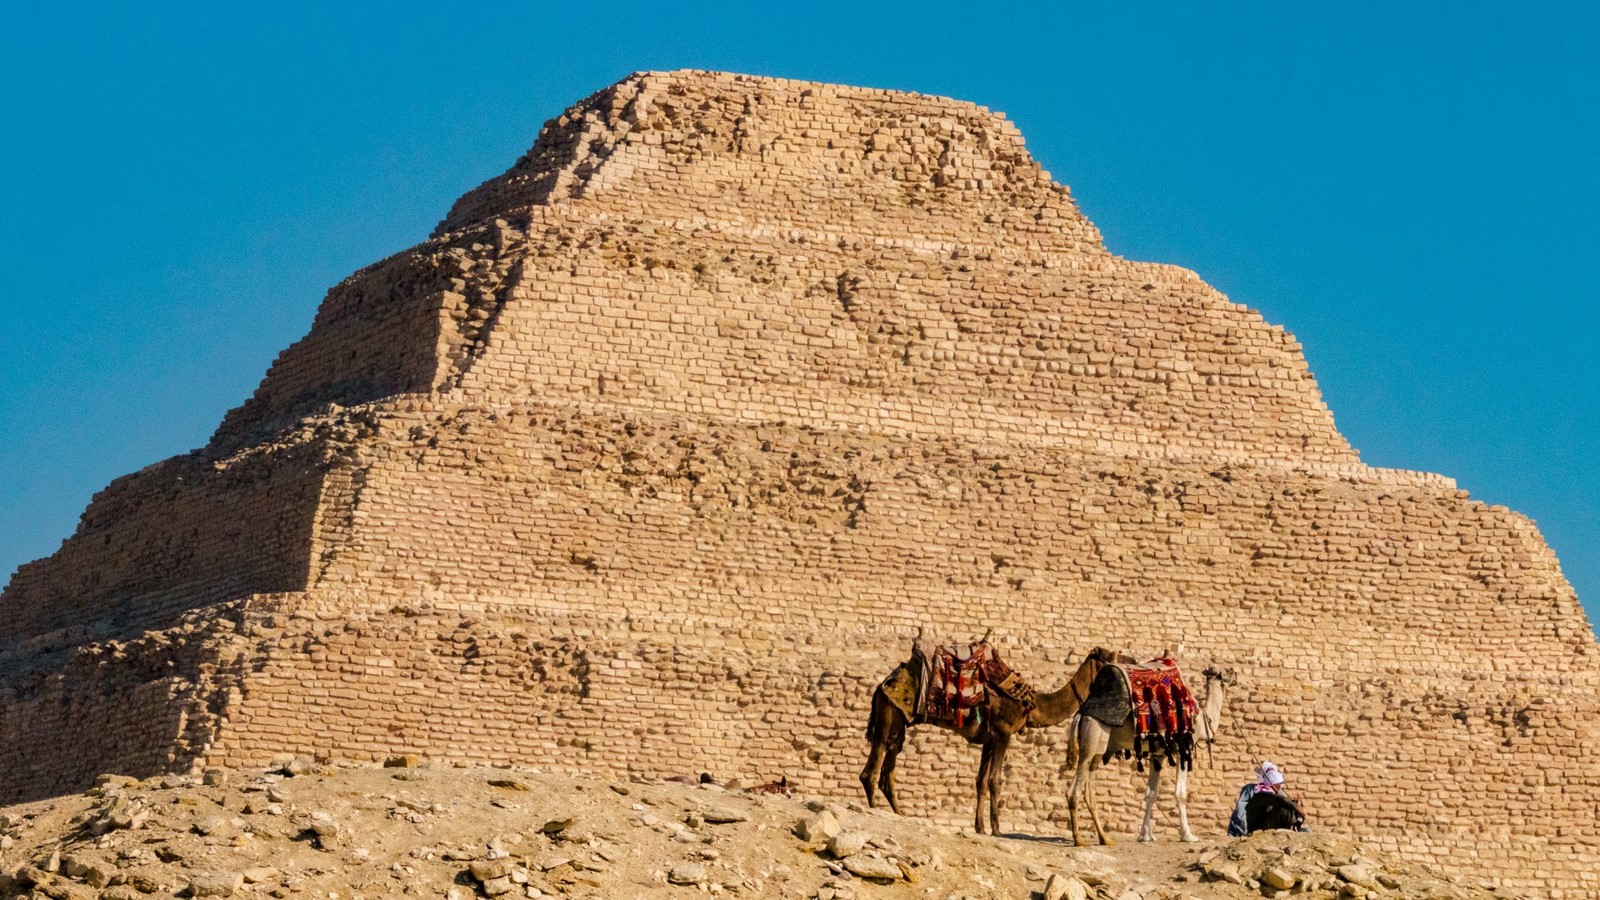 Buildings Of Egypt: 15 Architectural Marvels Every Architect Must See - Sheet12